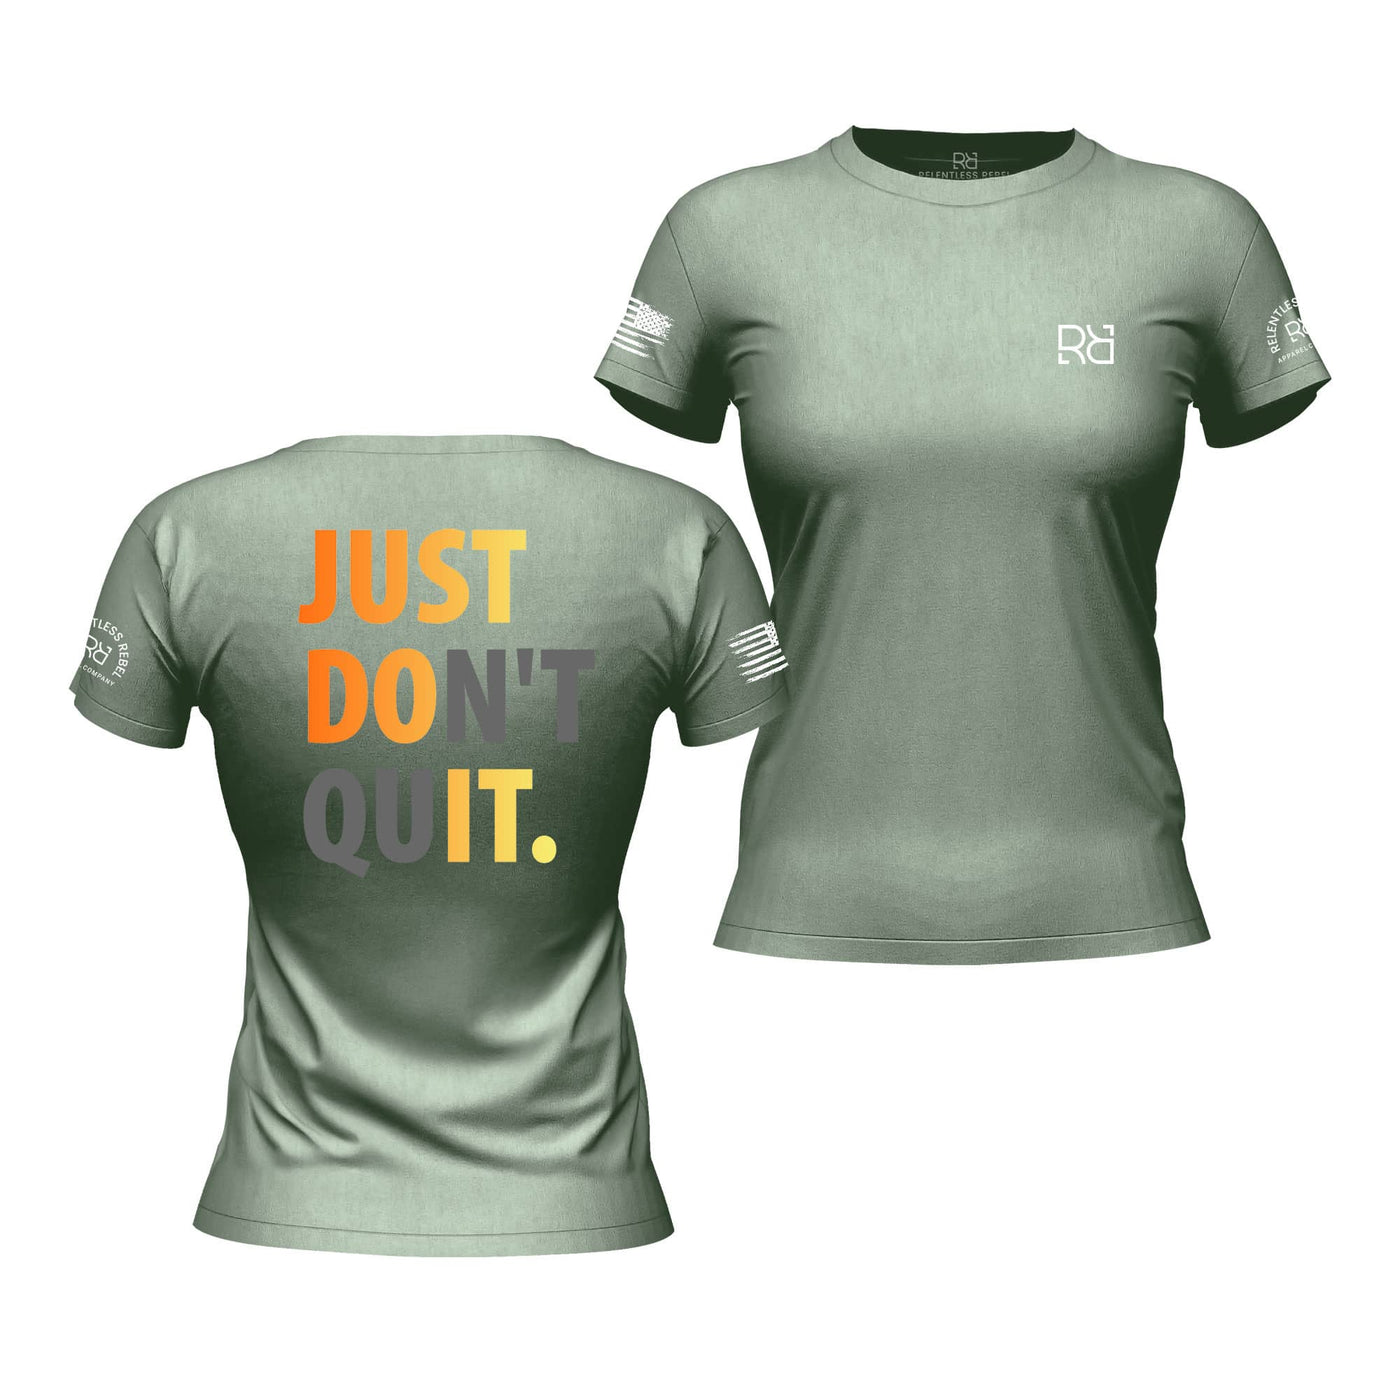 Heather Sage Women's Just Don't Quit Back Design Tee